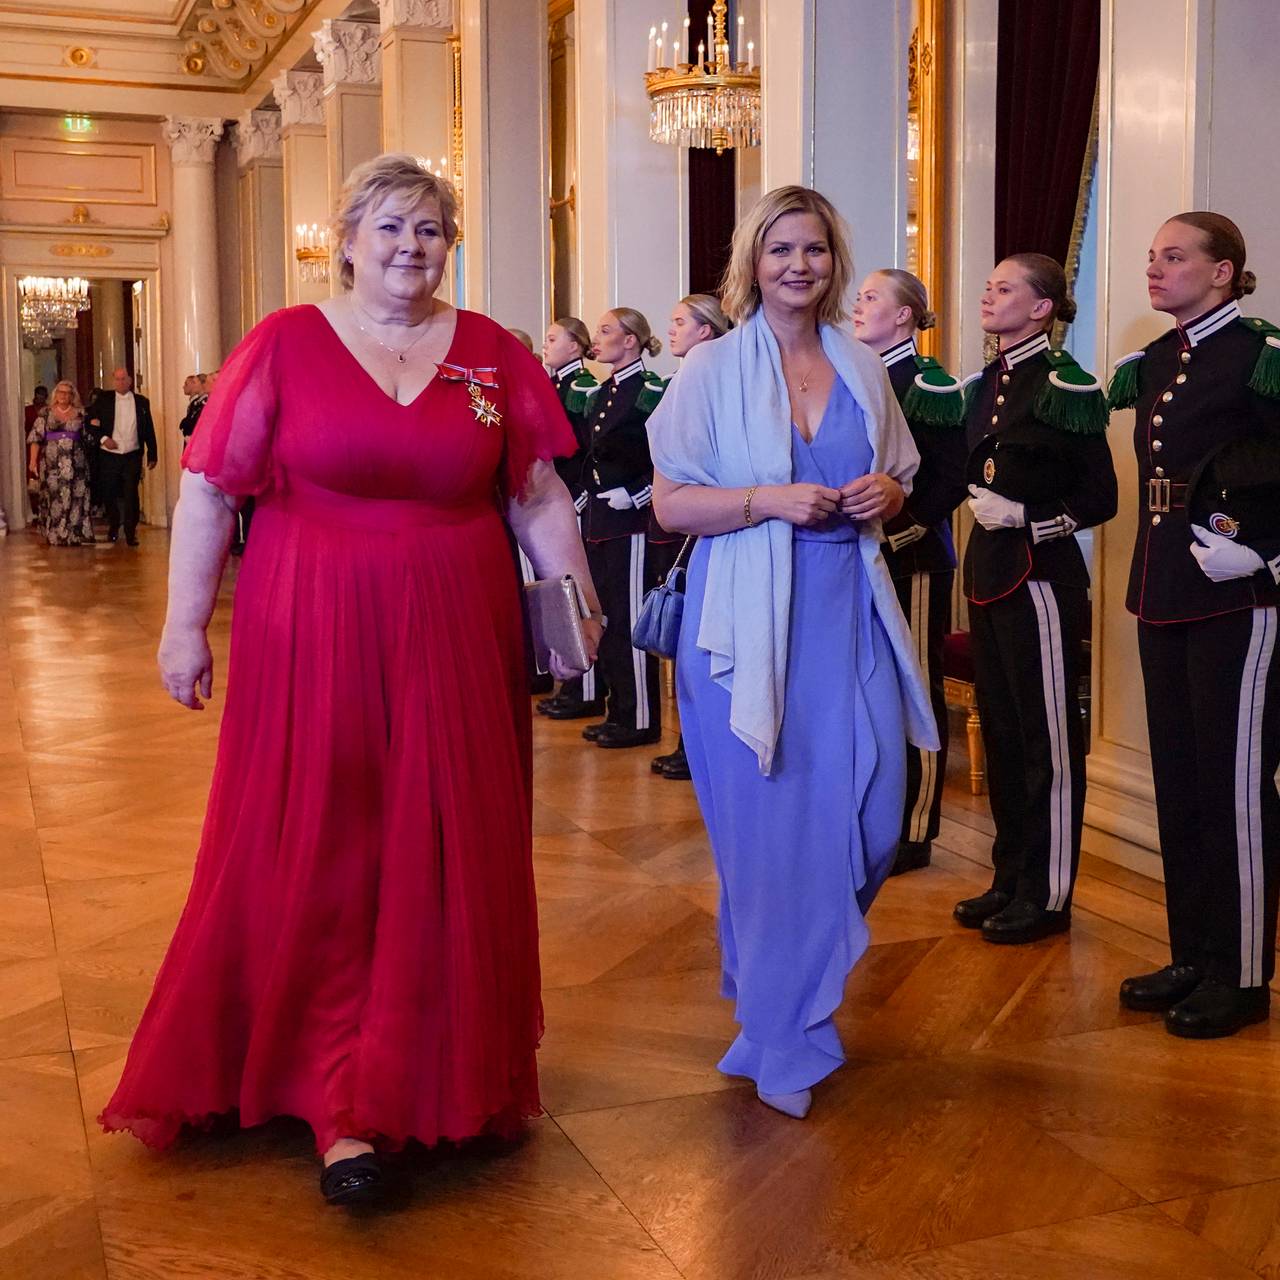 Erna Solberg and Jory Melby.